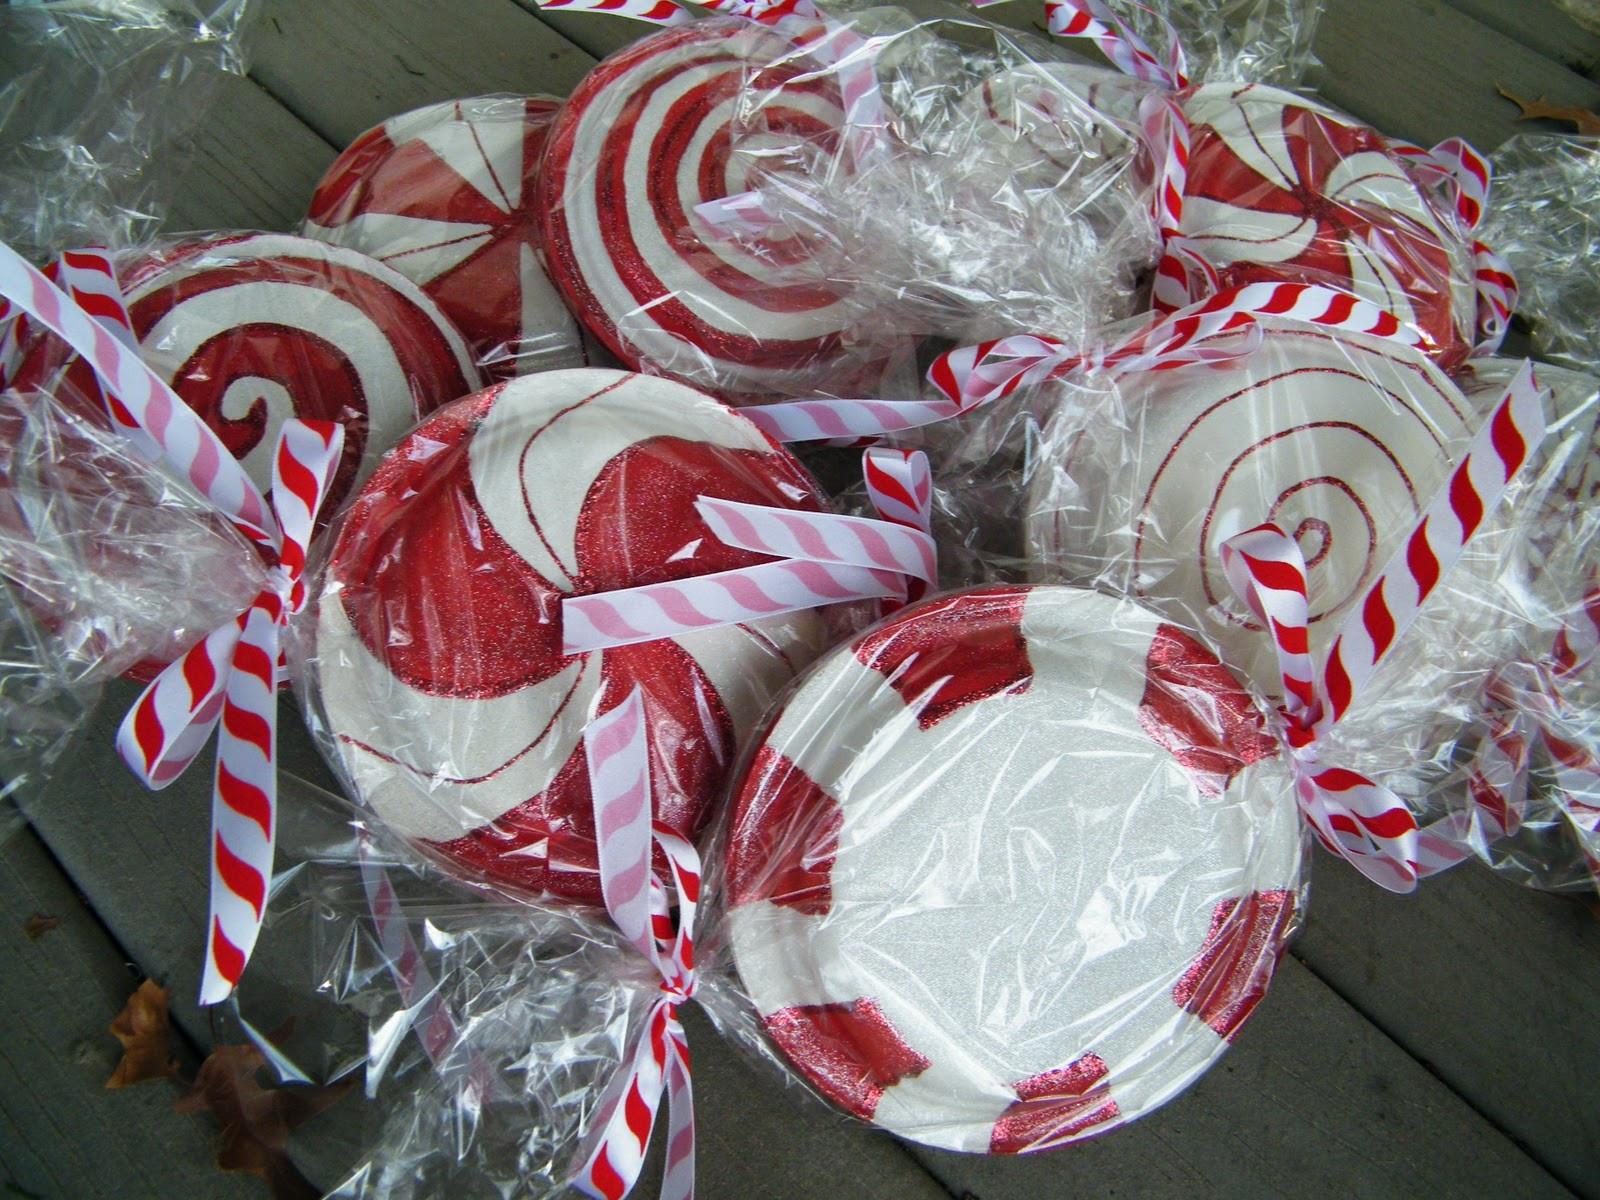 Peppermint Candy Christmas Decorations
 amy d randomly me paper plate peppermint candy tutorial